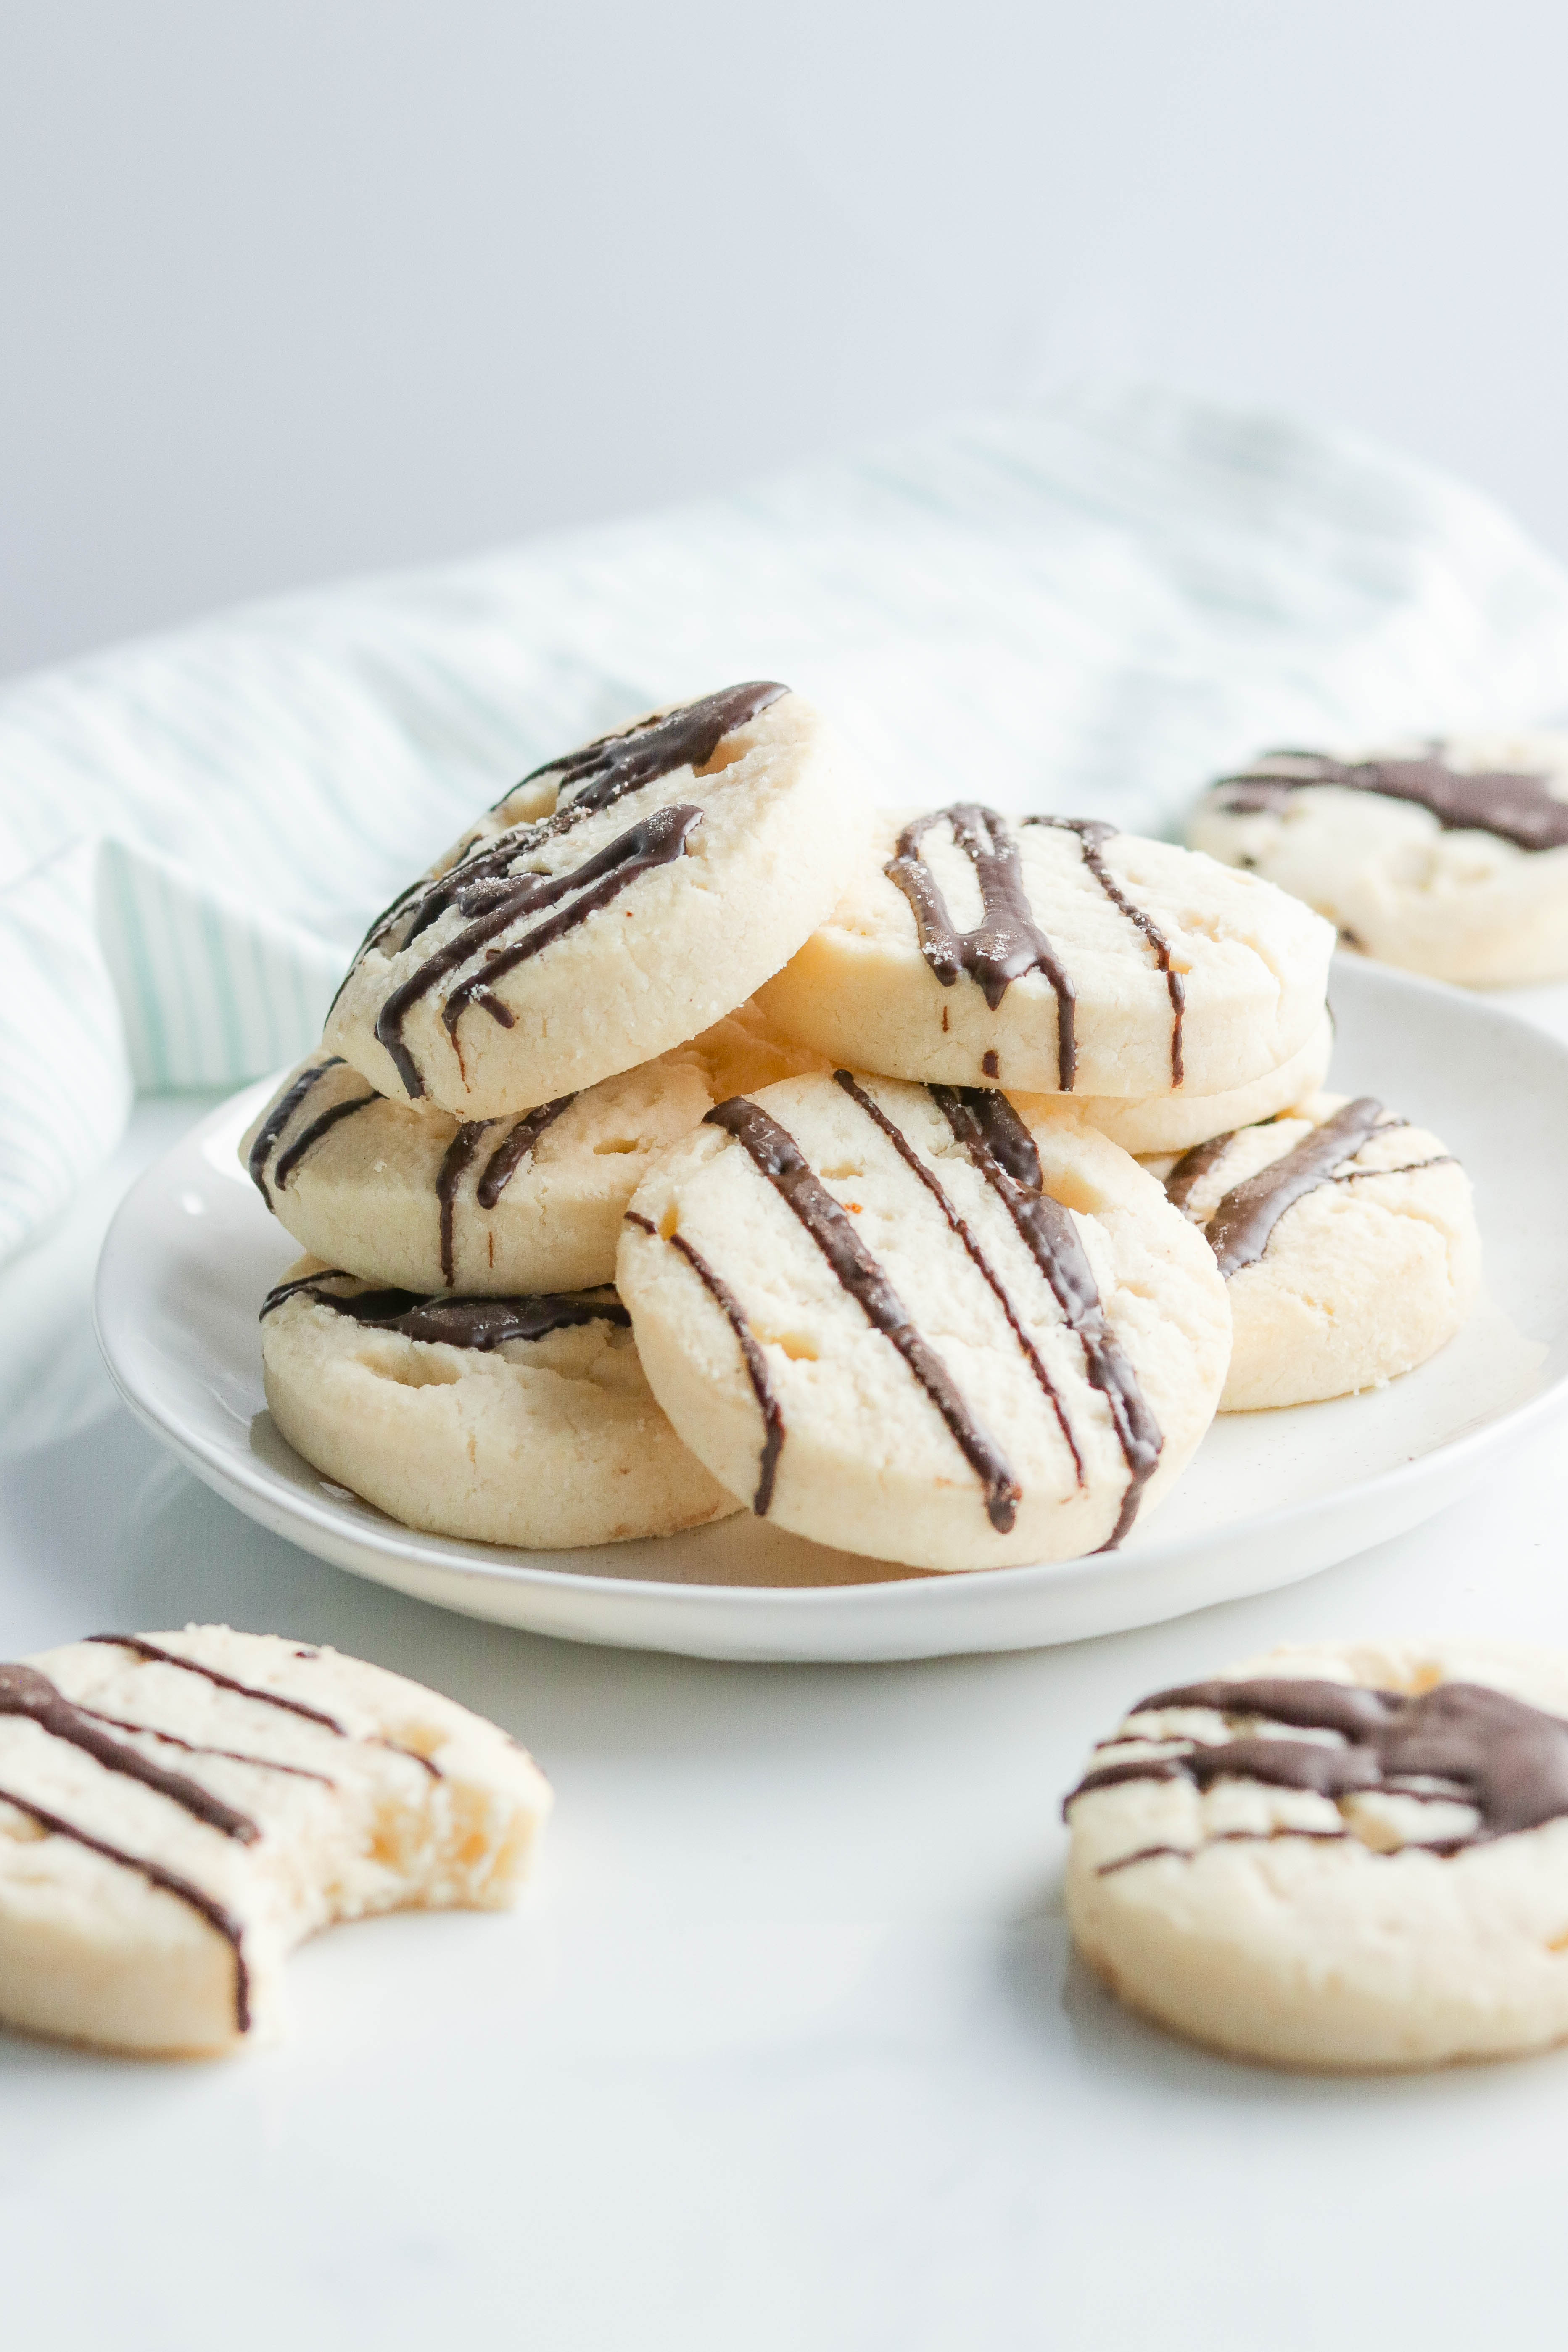 Sugar Free Cookies {Vegan + Gluten Free} || Soft and delicious gluten free and vegan sugar cookies with a dark chocolate drizzle. Taking this holiday cookie to a new healthier level. Quick and easy to make. Please the entire family! #sugarcookies #holidaycookies #christmasbaking #glutenfree #vegan || Nikki's Plate